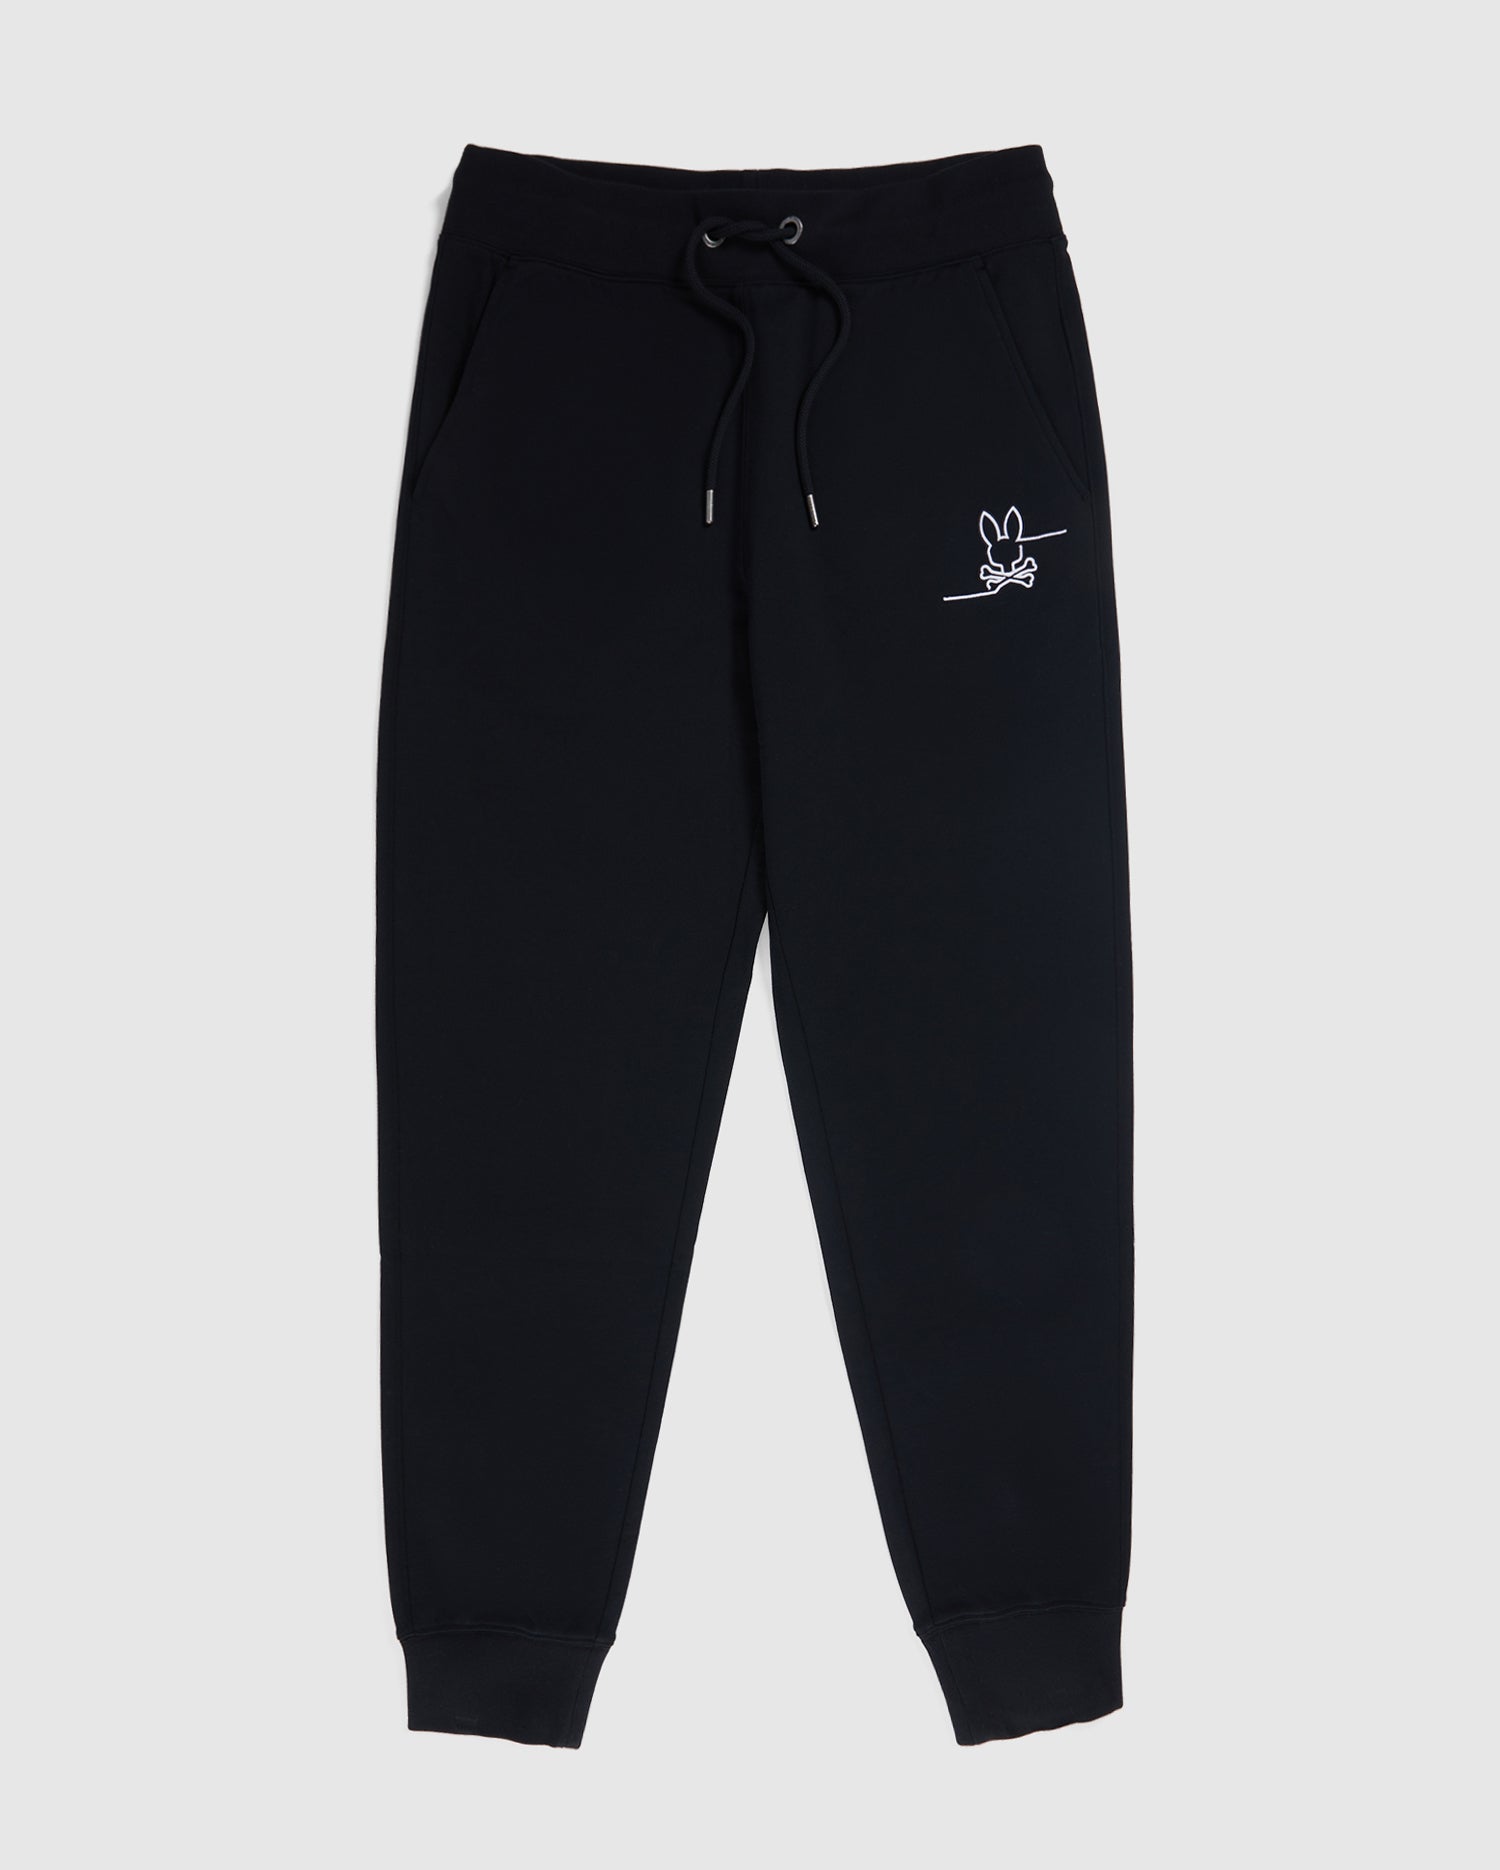 MENS NAVY CHESTER EMBROIDERED SWEATPANT